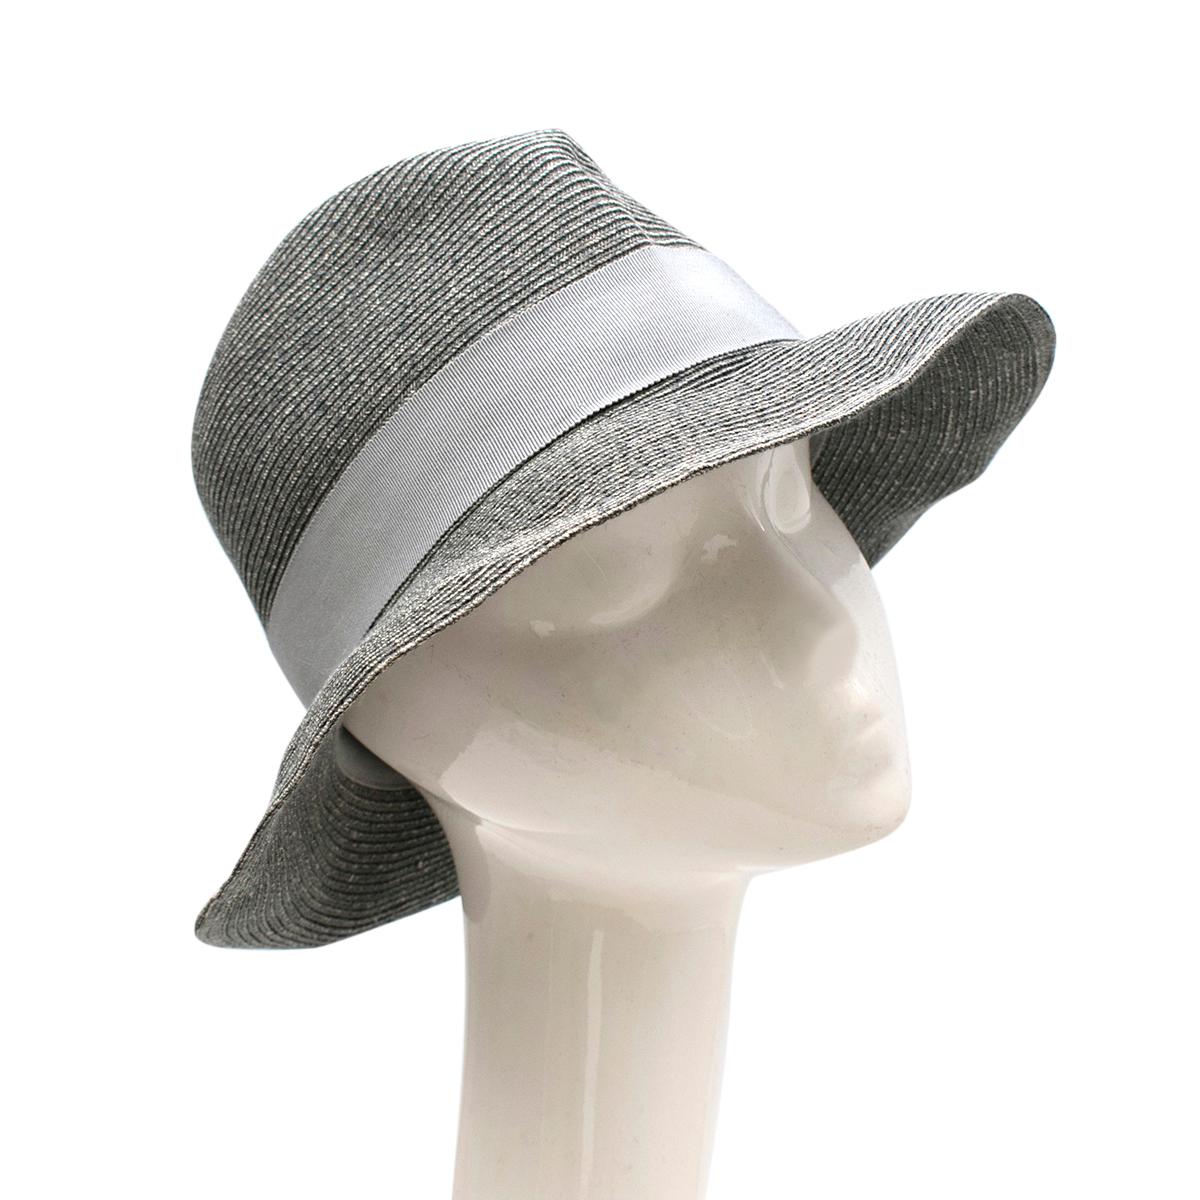 Hermes Paper Grey Summer Fedora Hat - Size 59


A collector model produced for the event 